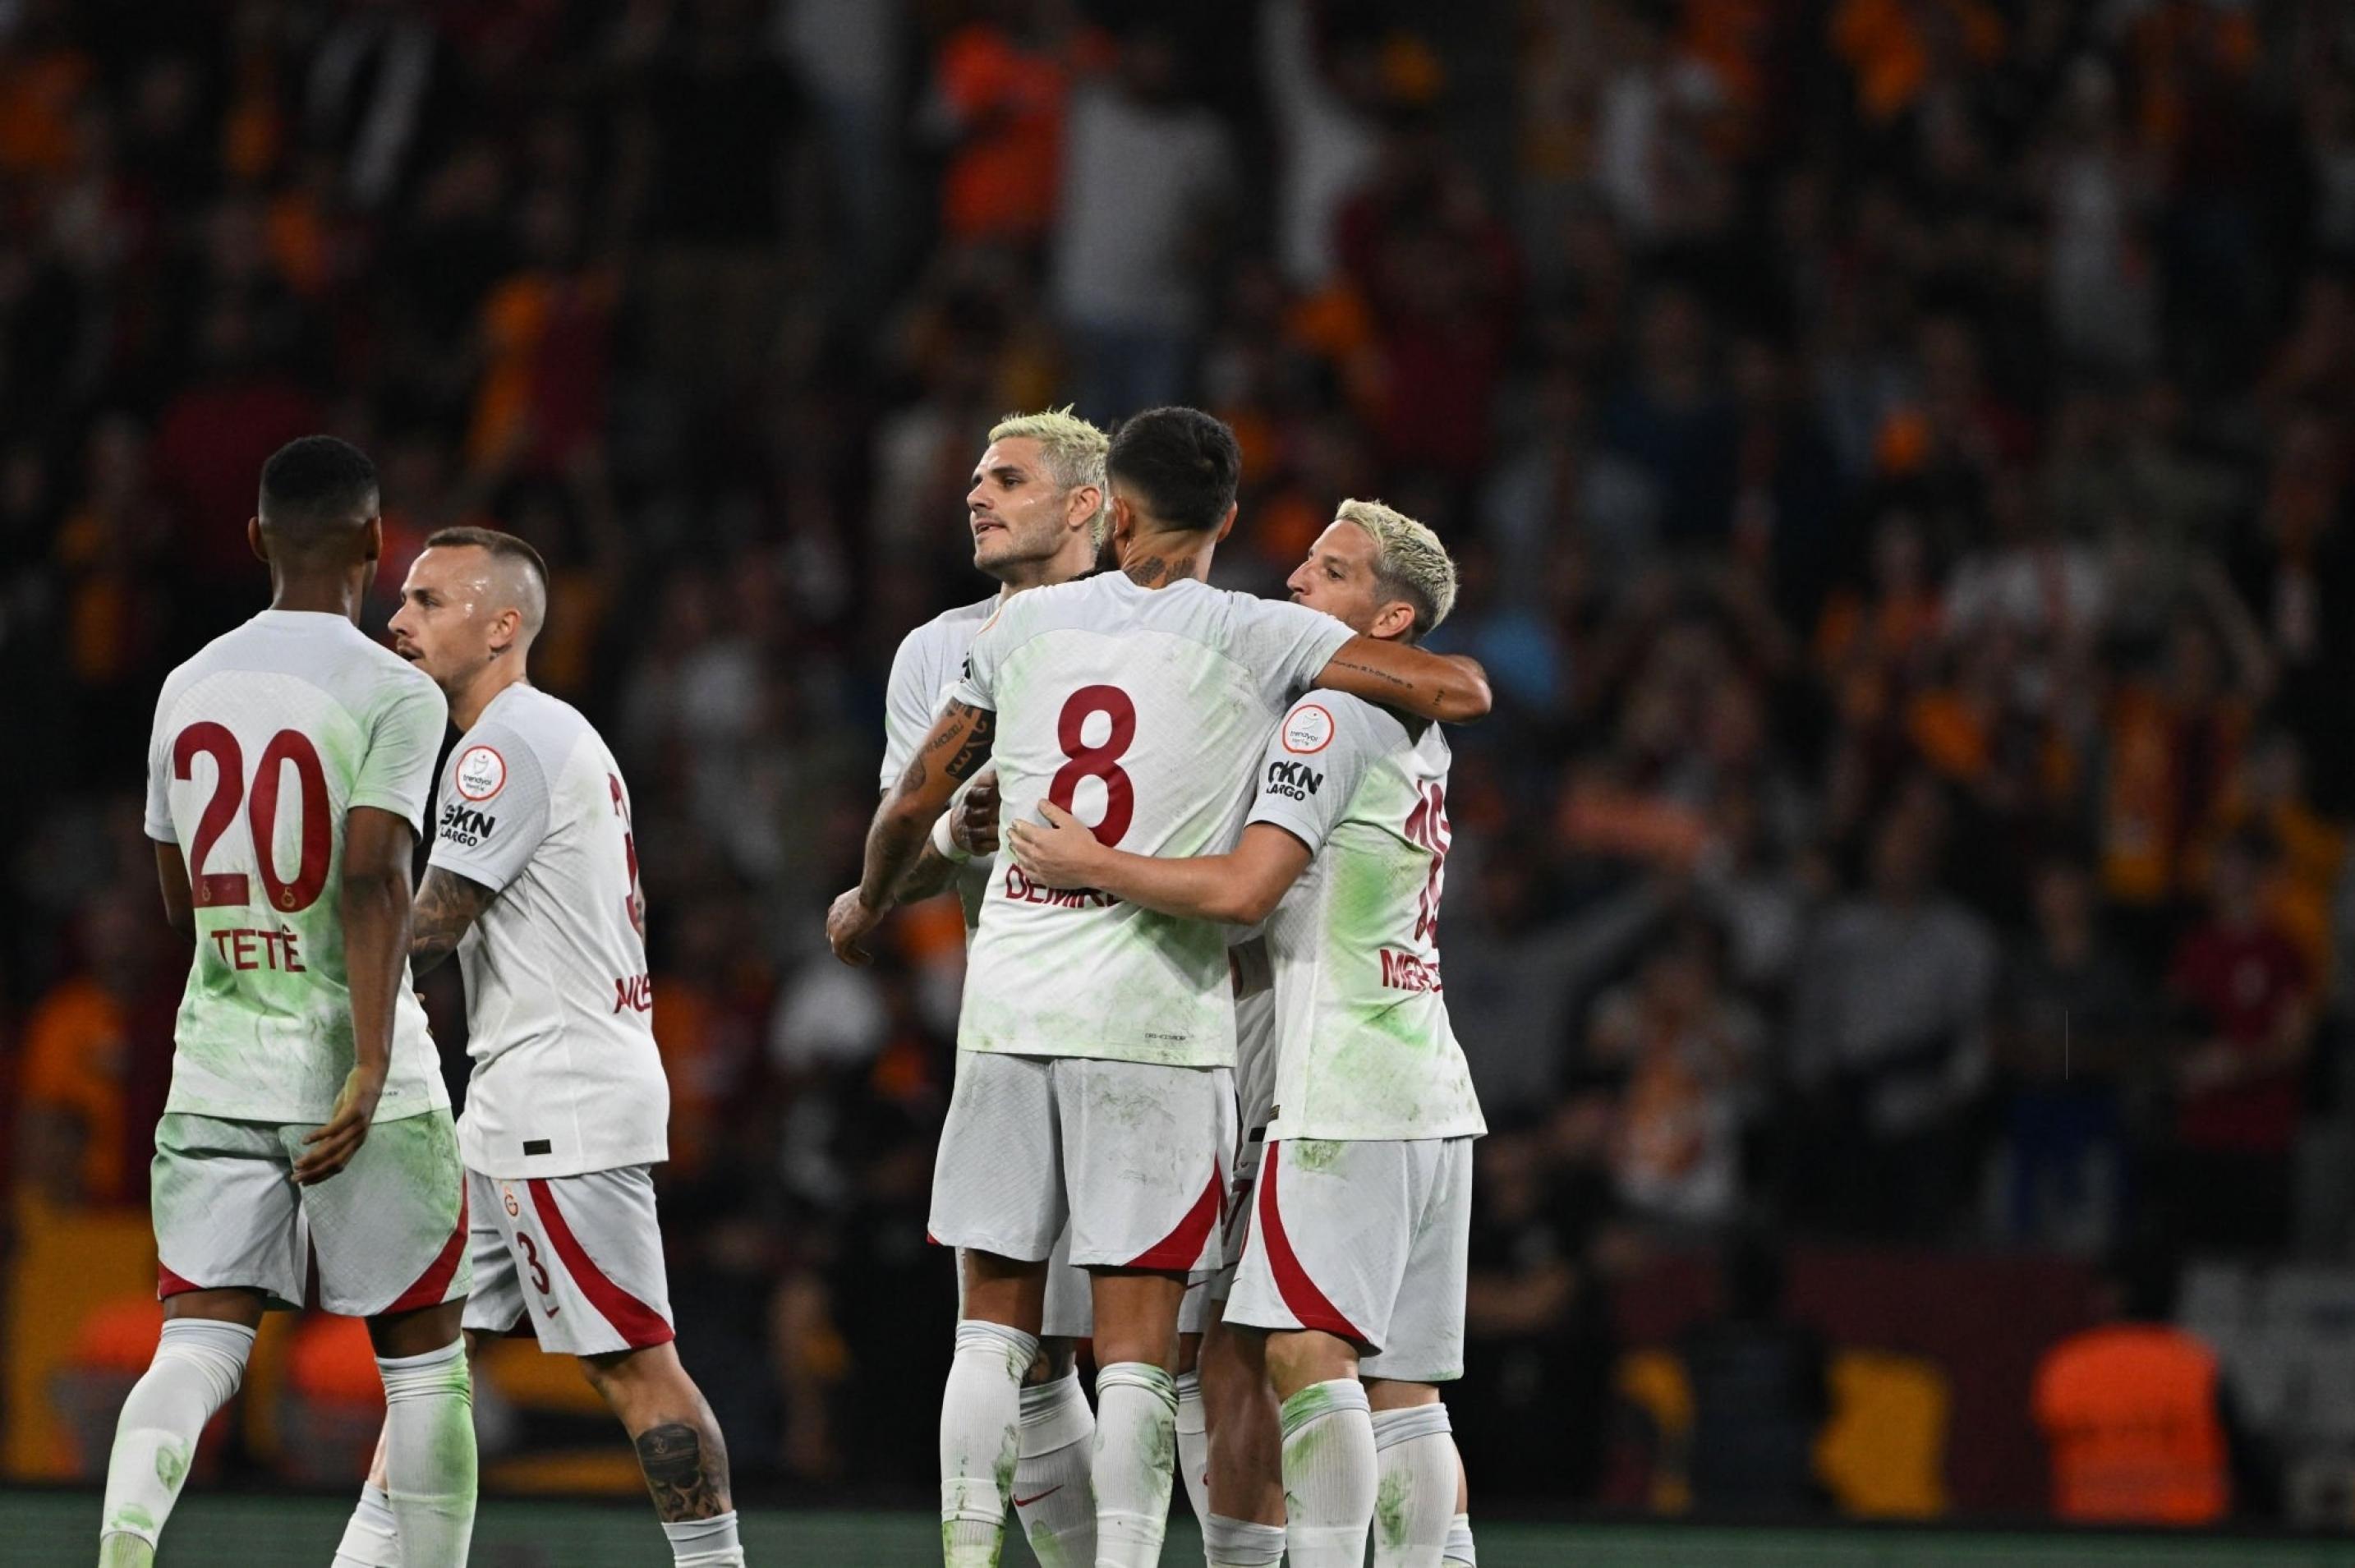 UPDATED Istanbulspor vs. Galatasaray - Game Highlights